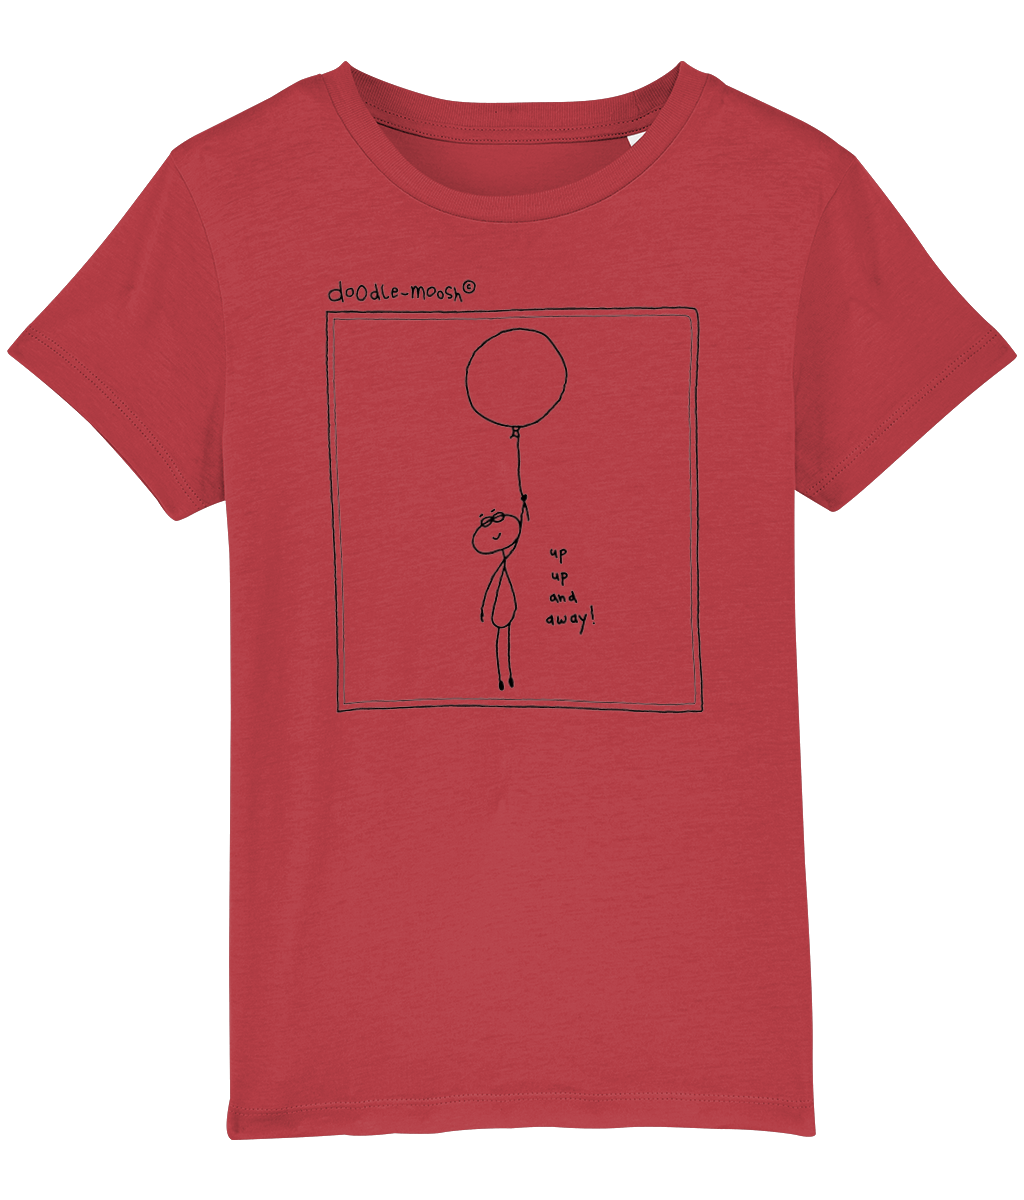 Up up and away t-shirt, red with black